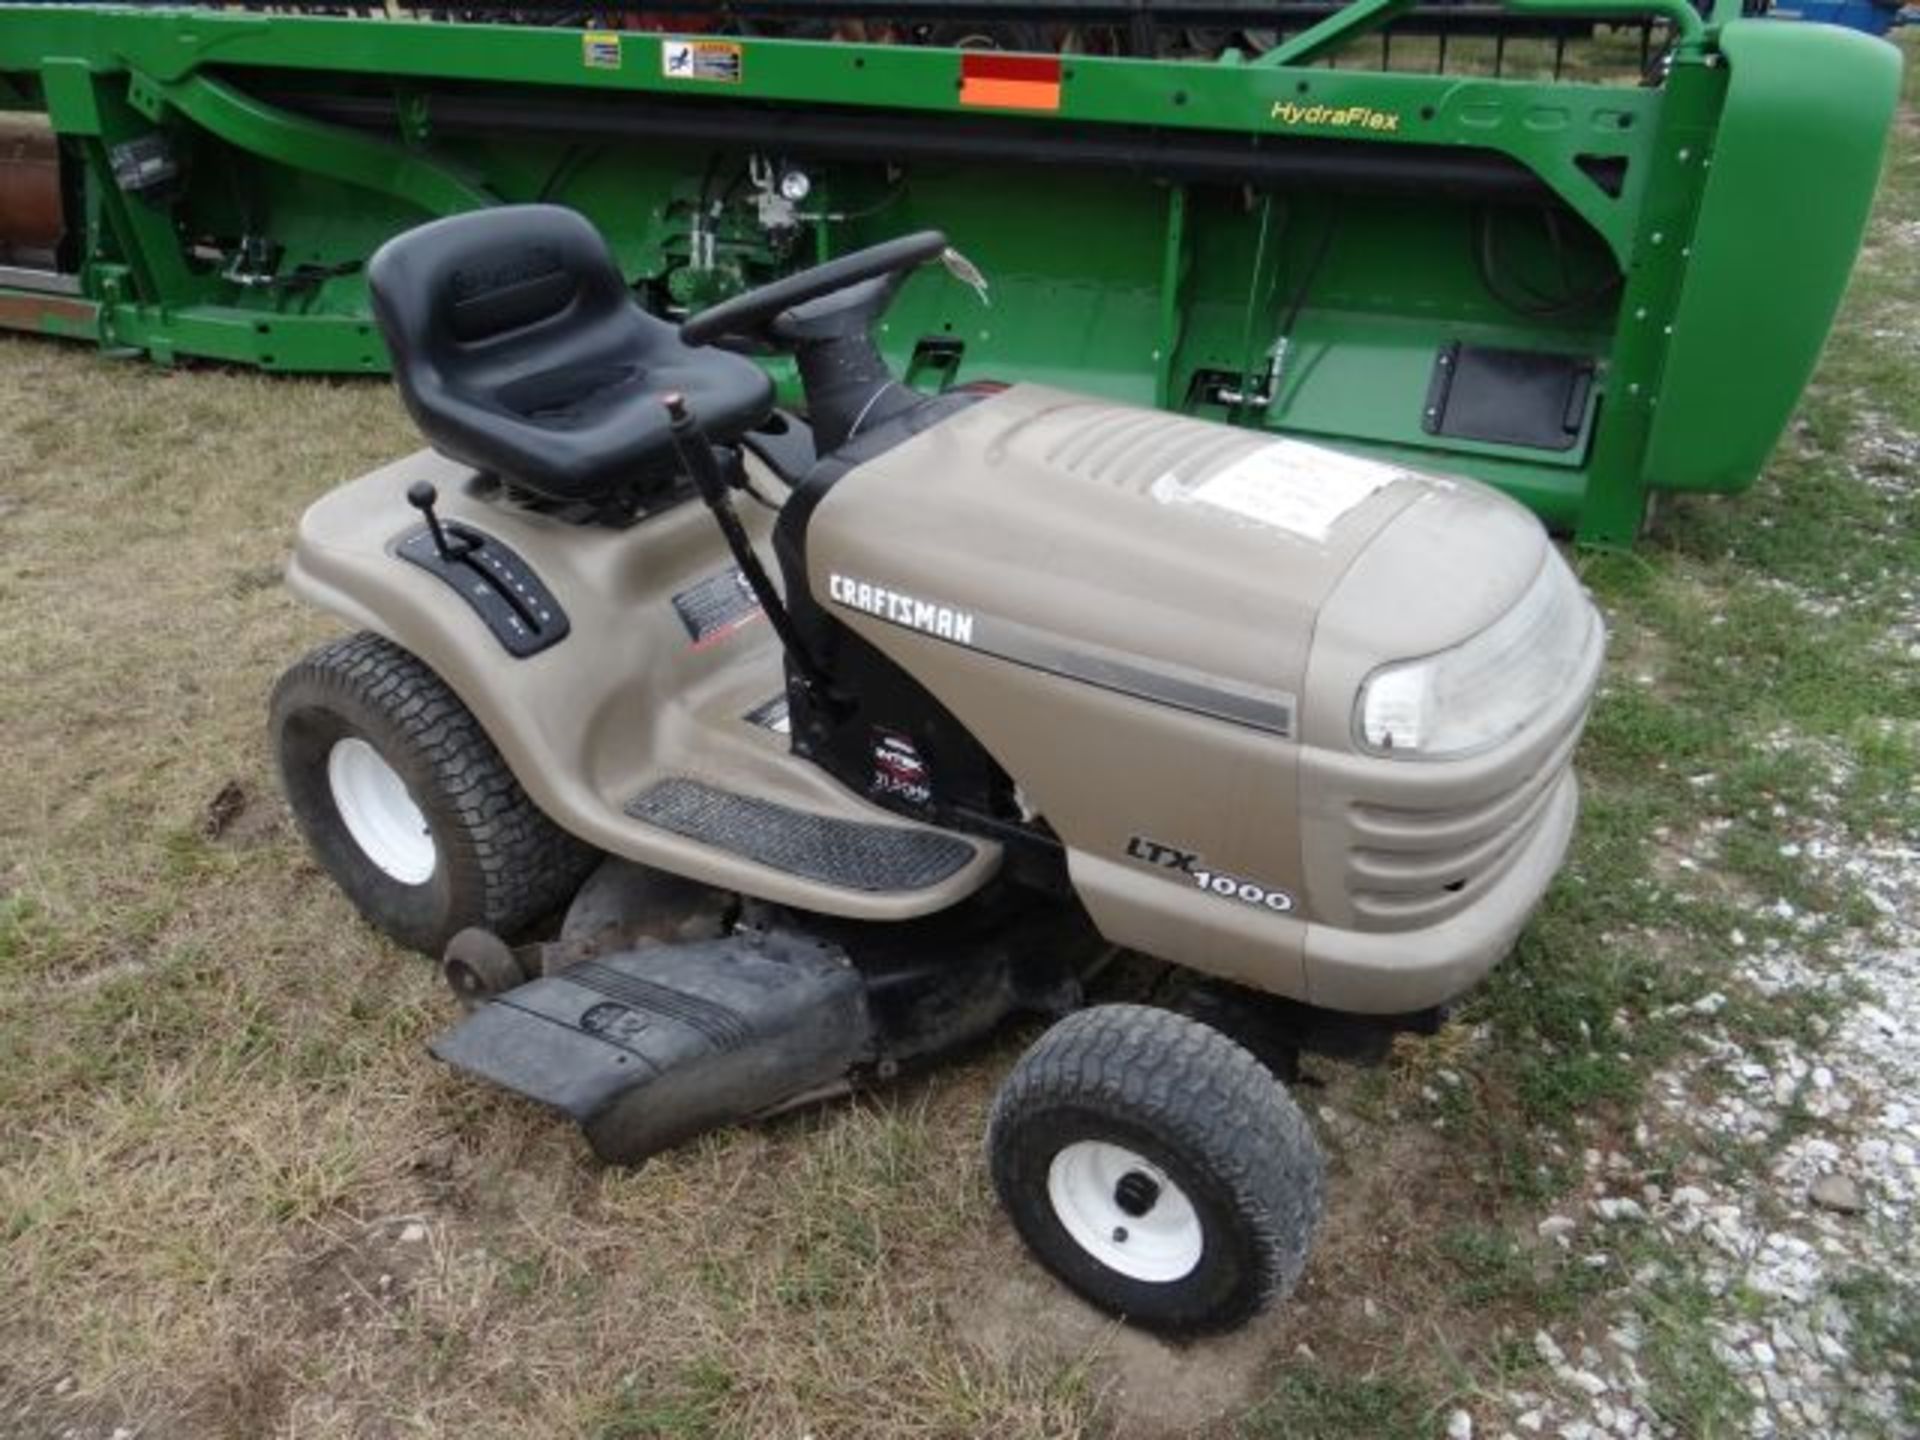 Sears Riding Mower 42" Deck, New Battery, Manual in the Shed - Image 2 of 3